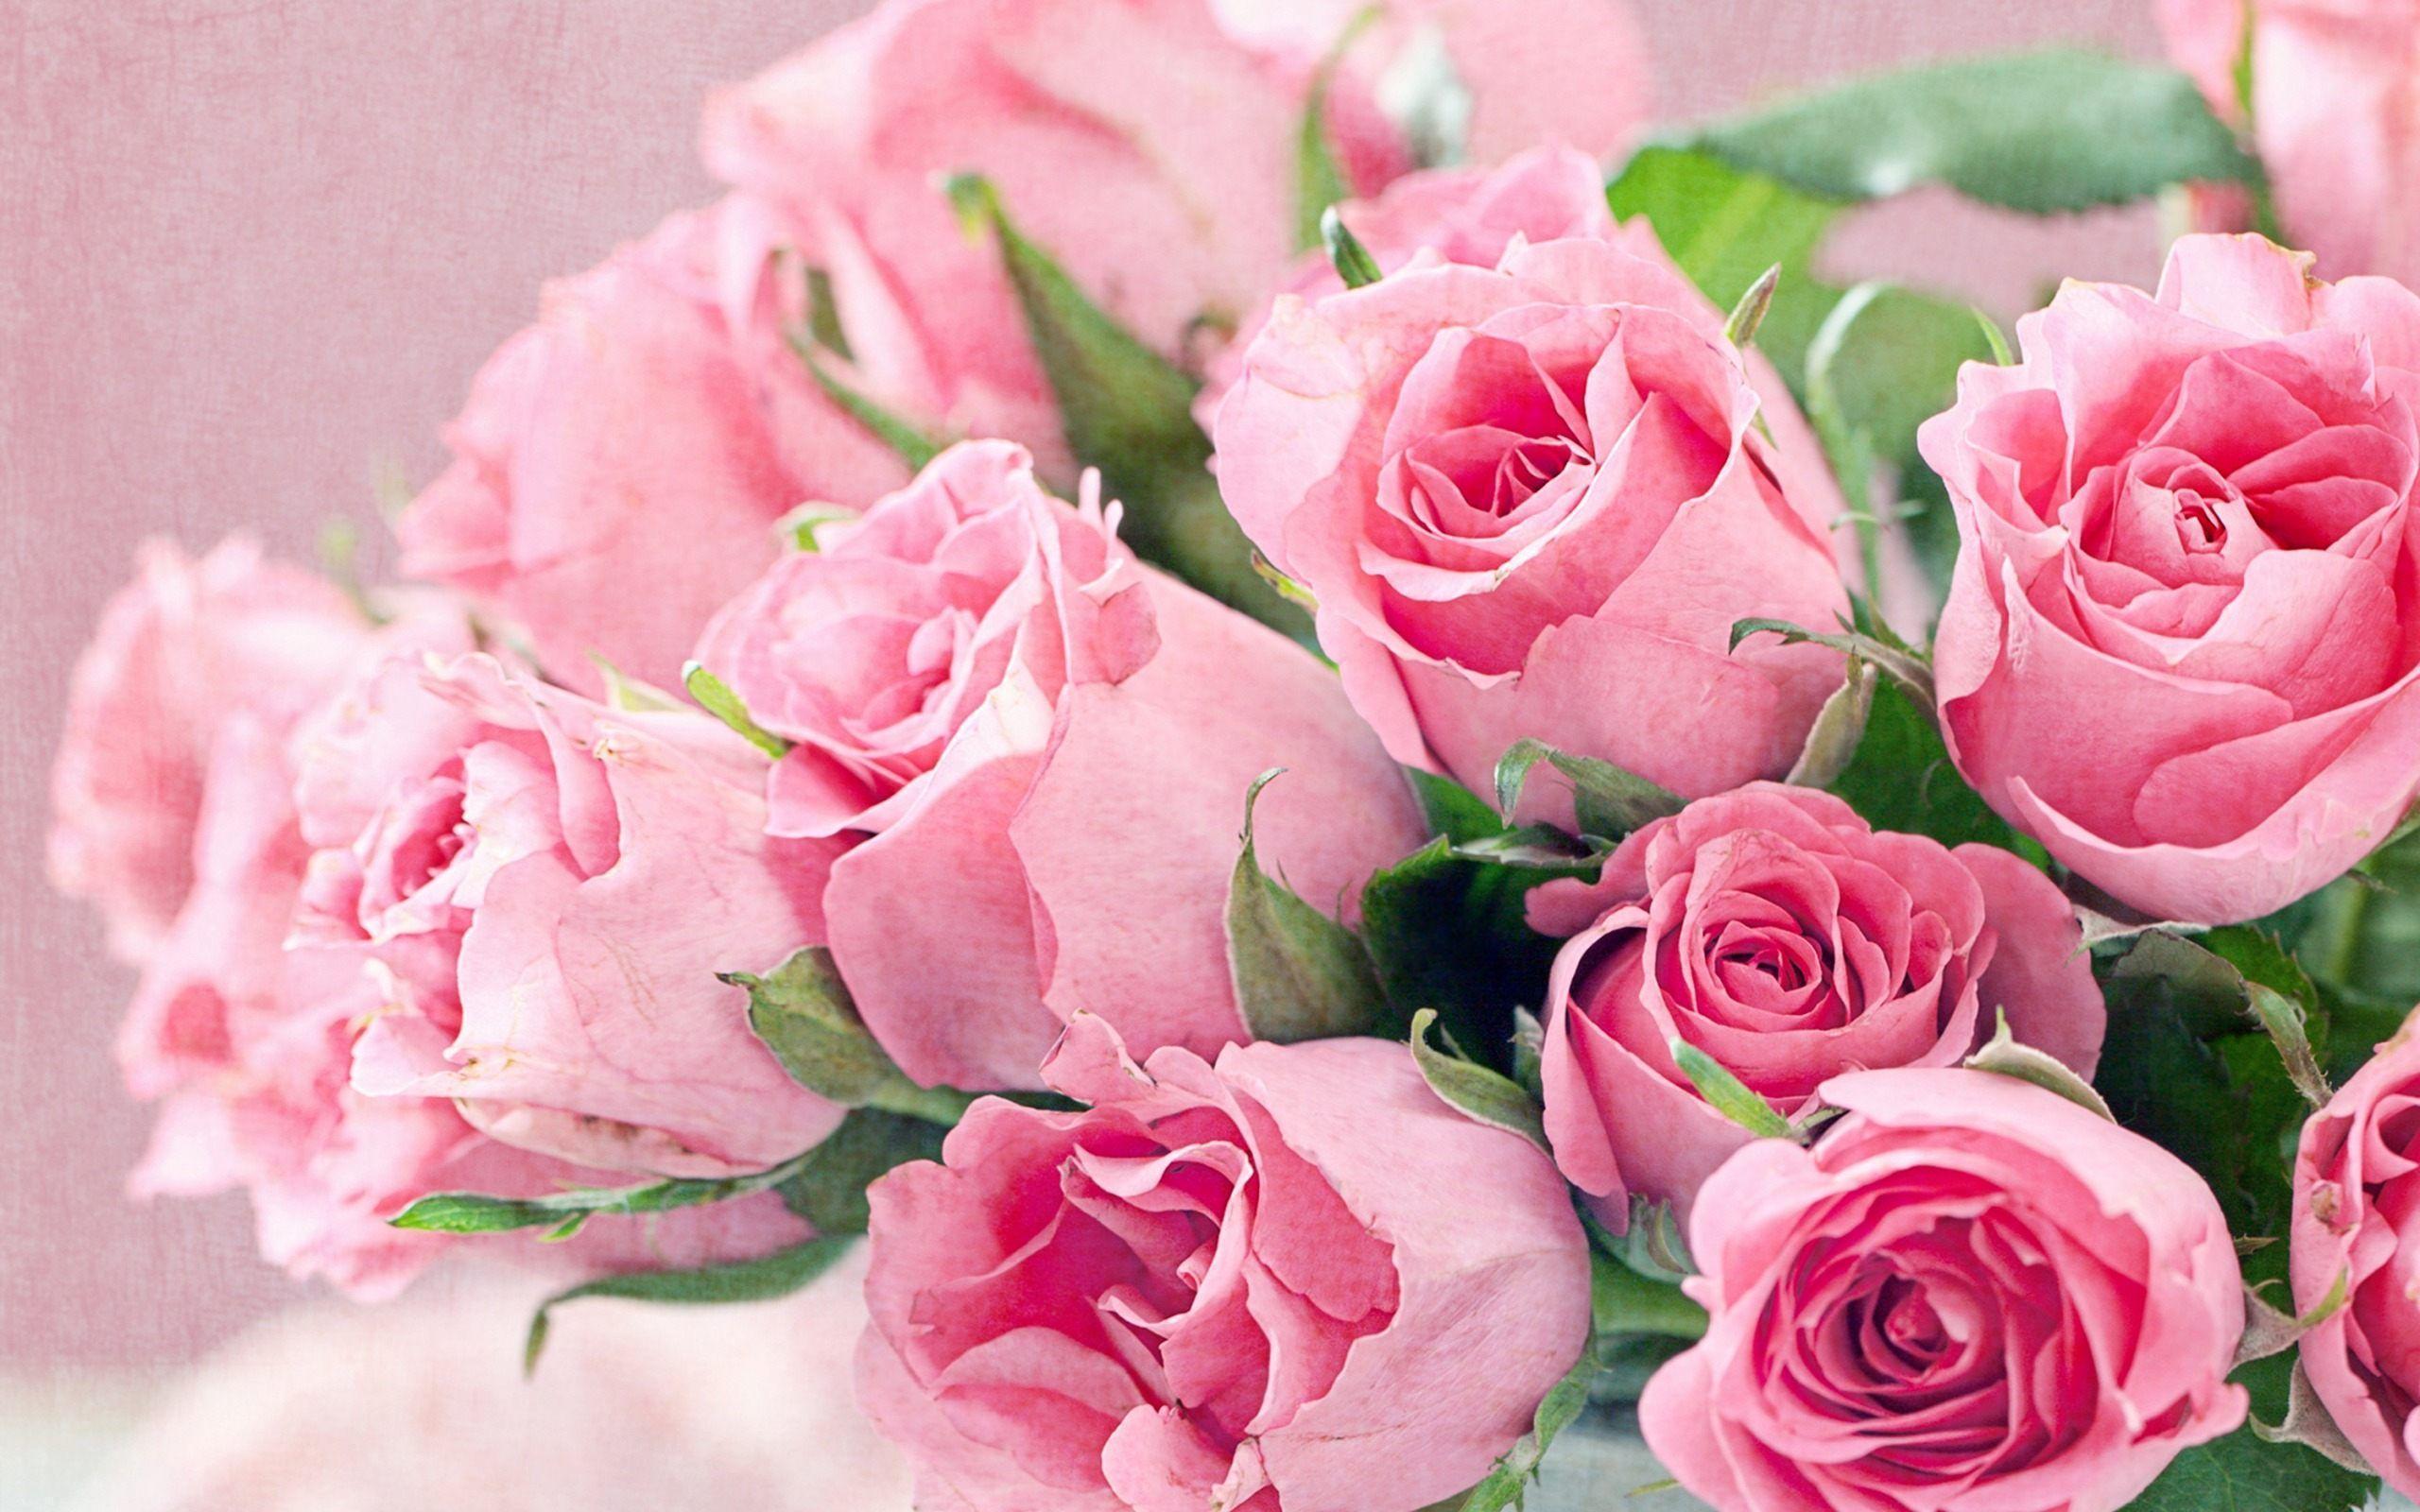 15 Outstanding pink flower desktop wallpaper hd You Can Get It Free Of Charge - Aesthetic Arena